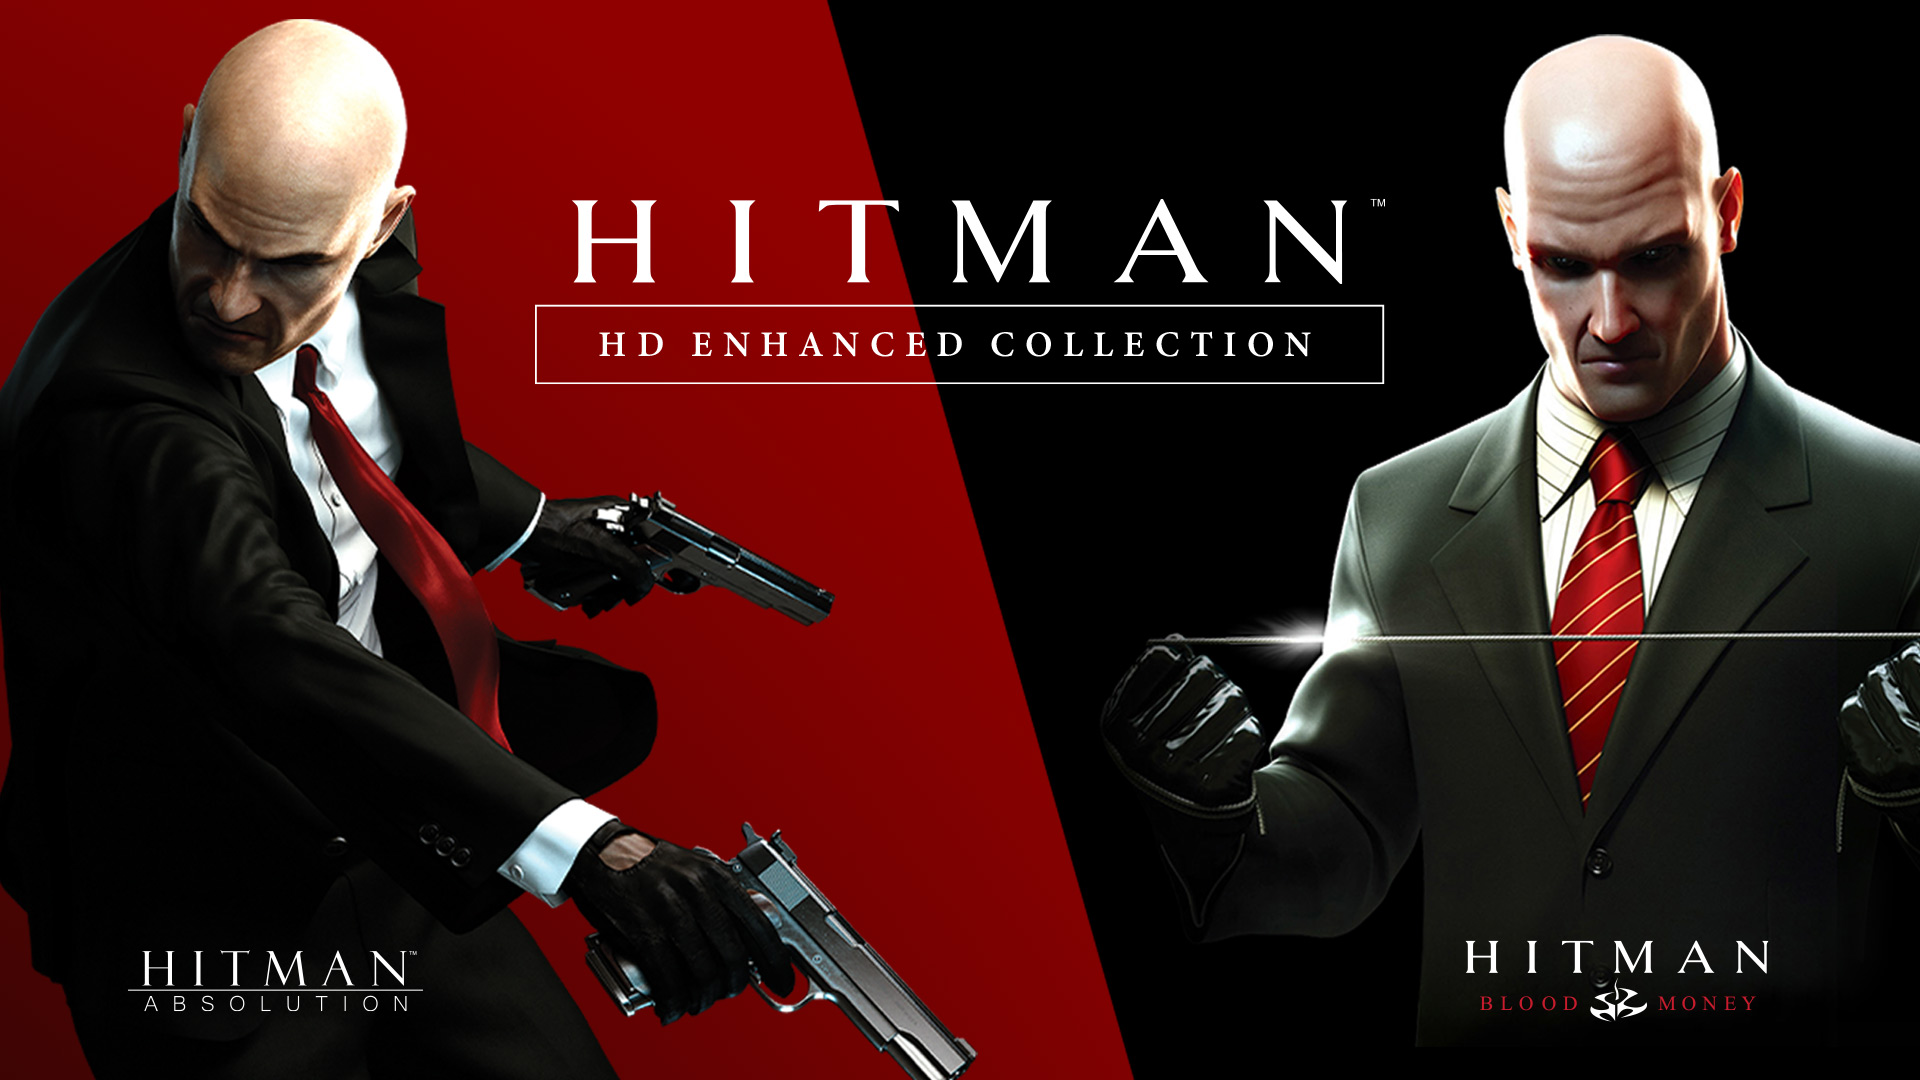 download hitman blood money ps4 for free